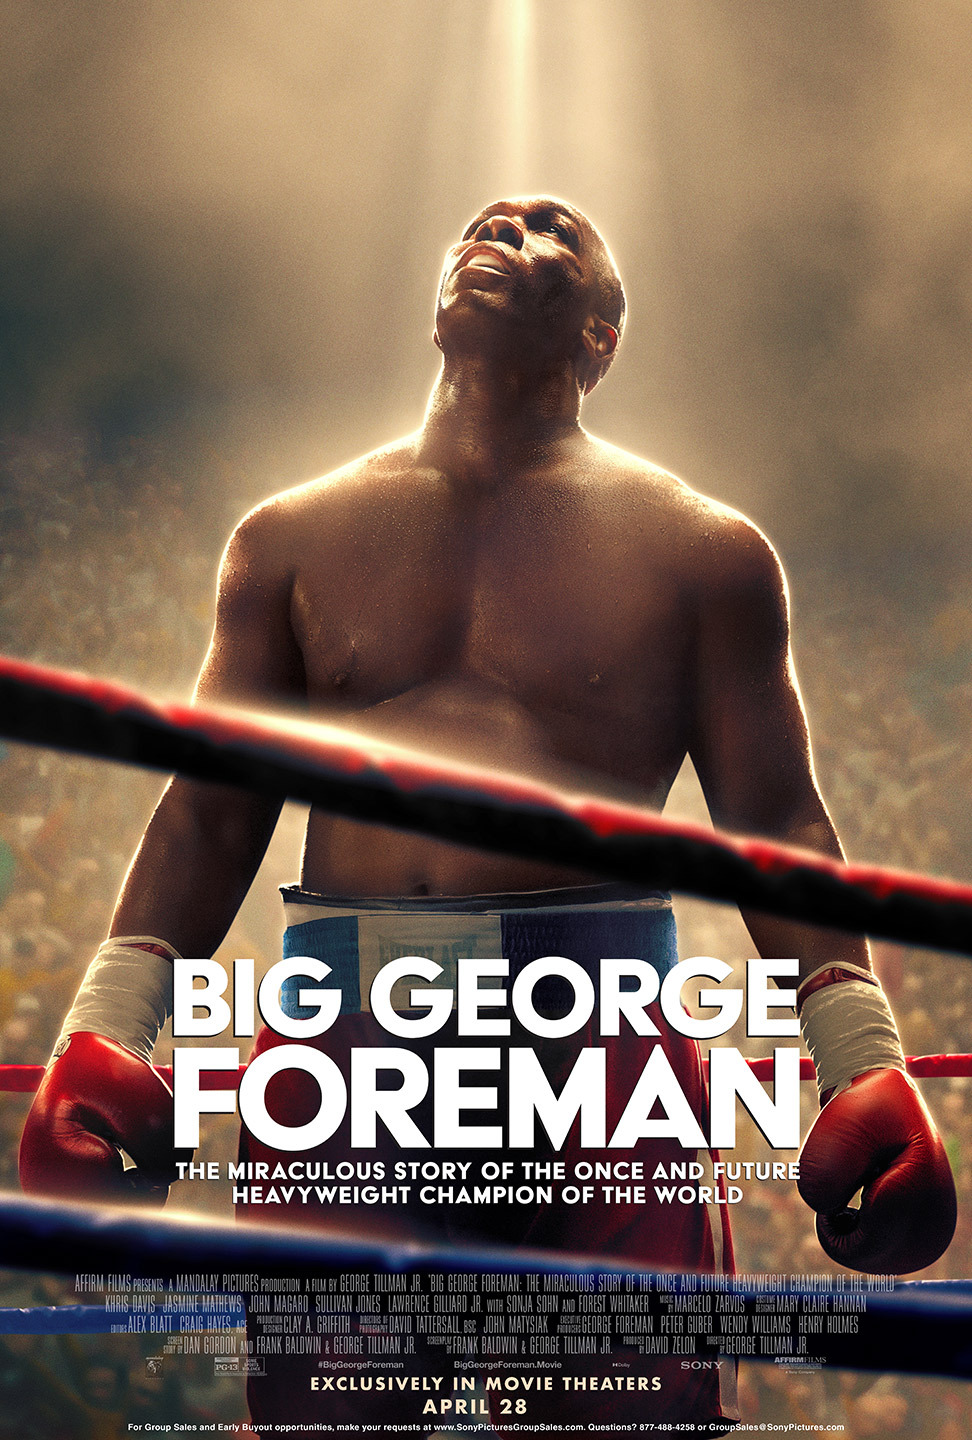 BIG FOREMAN THE MIRACULOUS STORY OF THE ONCE AND FUTURE